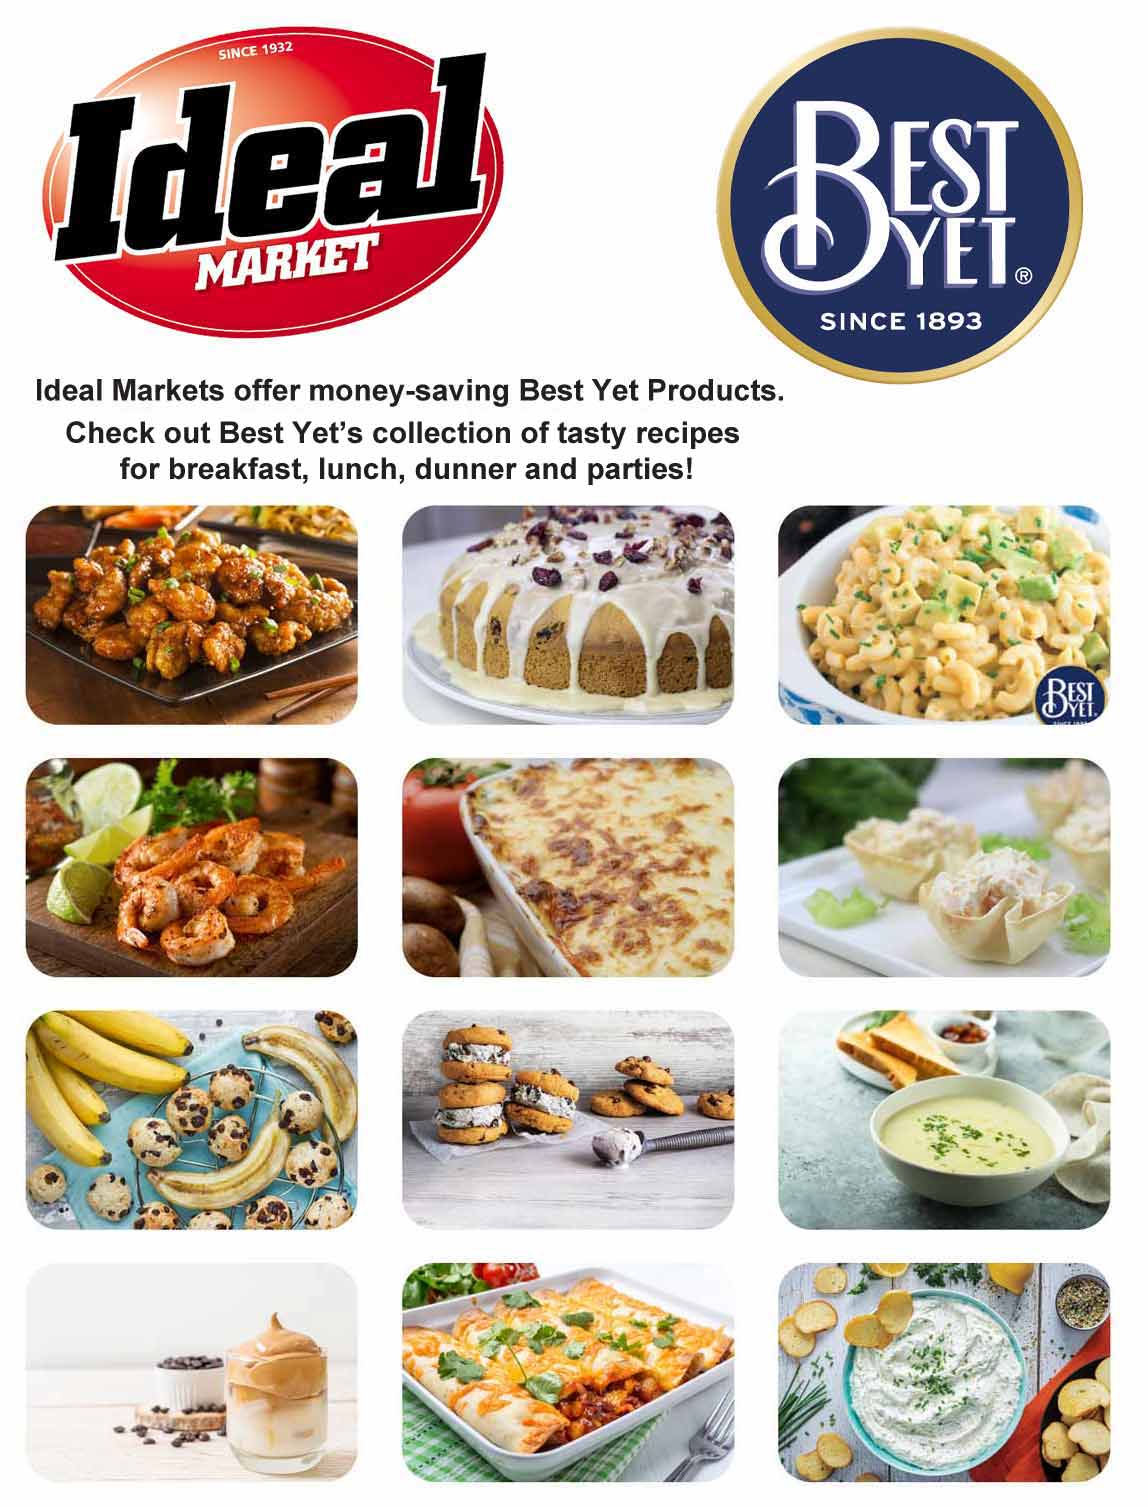 Ideal Markets offer Best Yet private label products.